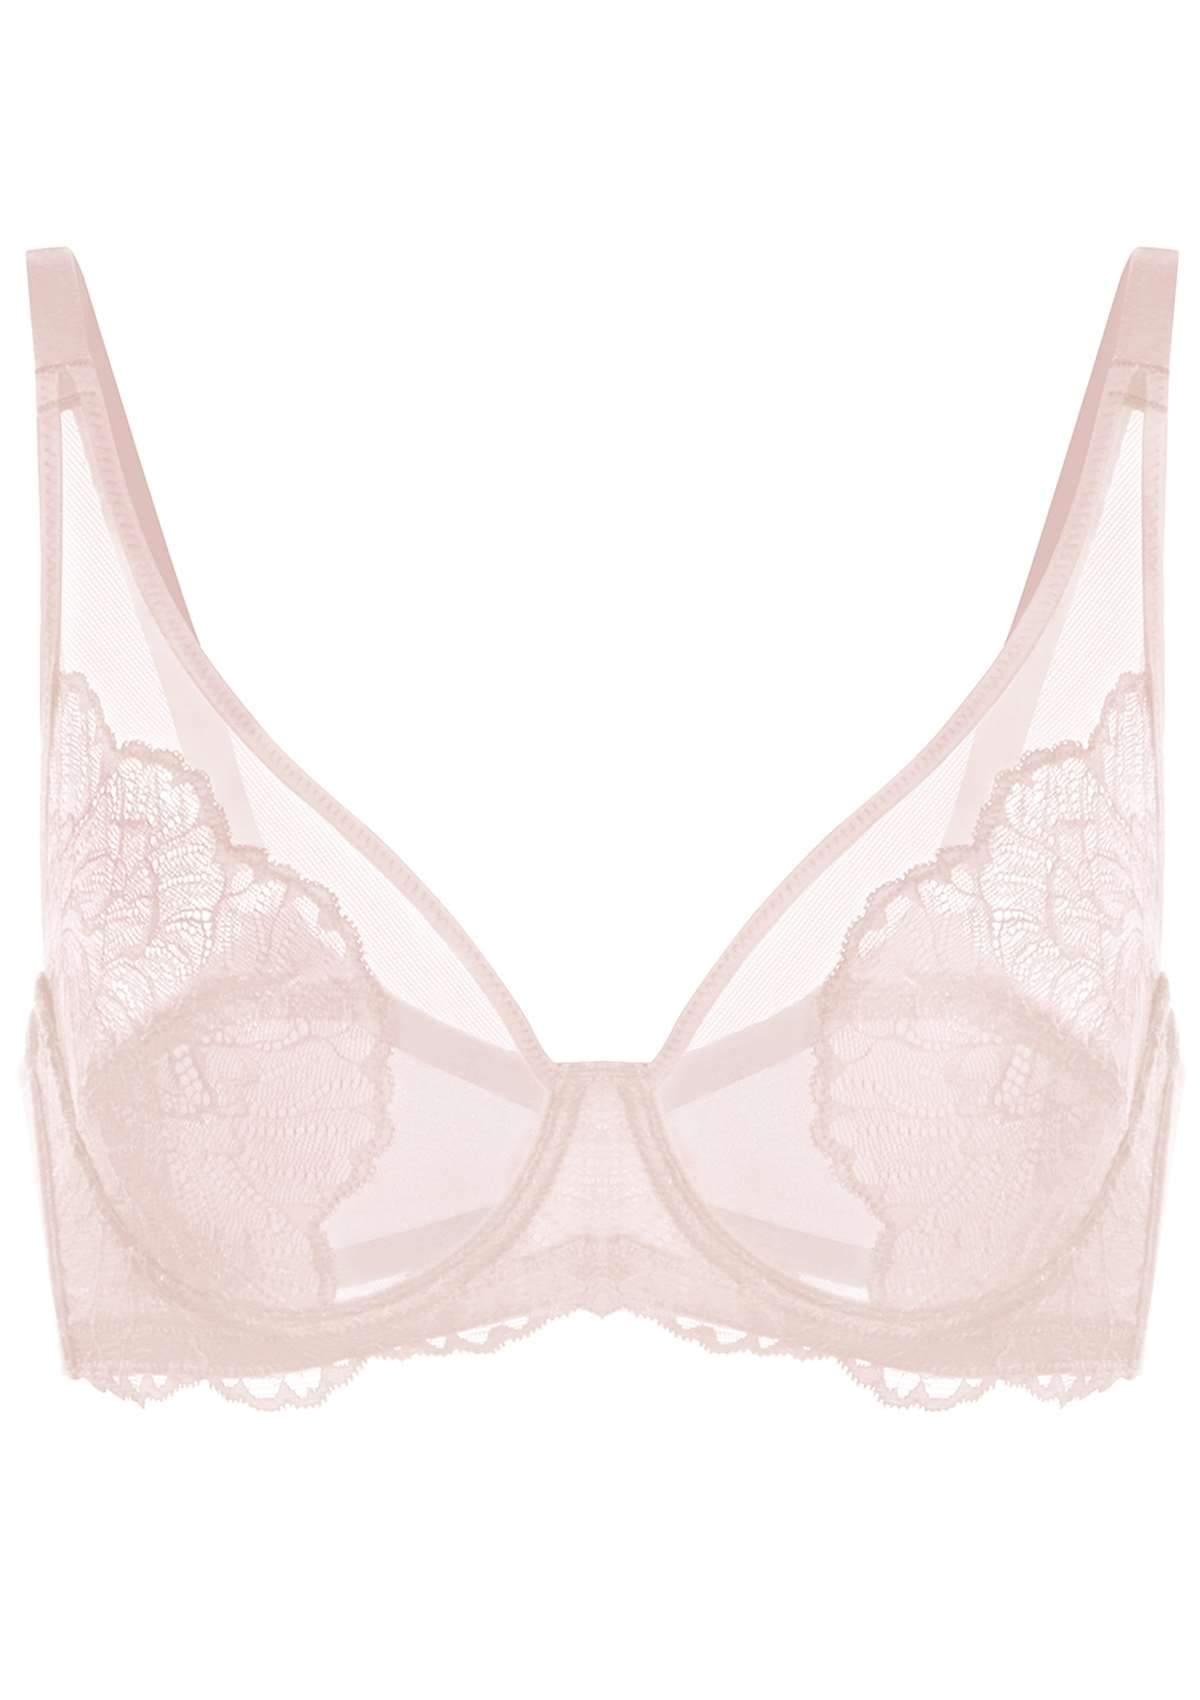 HSIA Blossom Lace Bra And Panties Set: Best Bra For Large Busts - Dark Pink / 42 / H